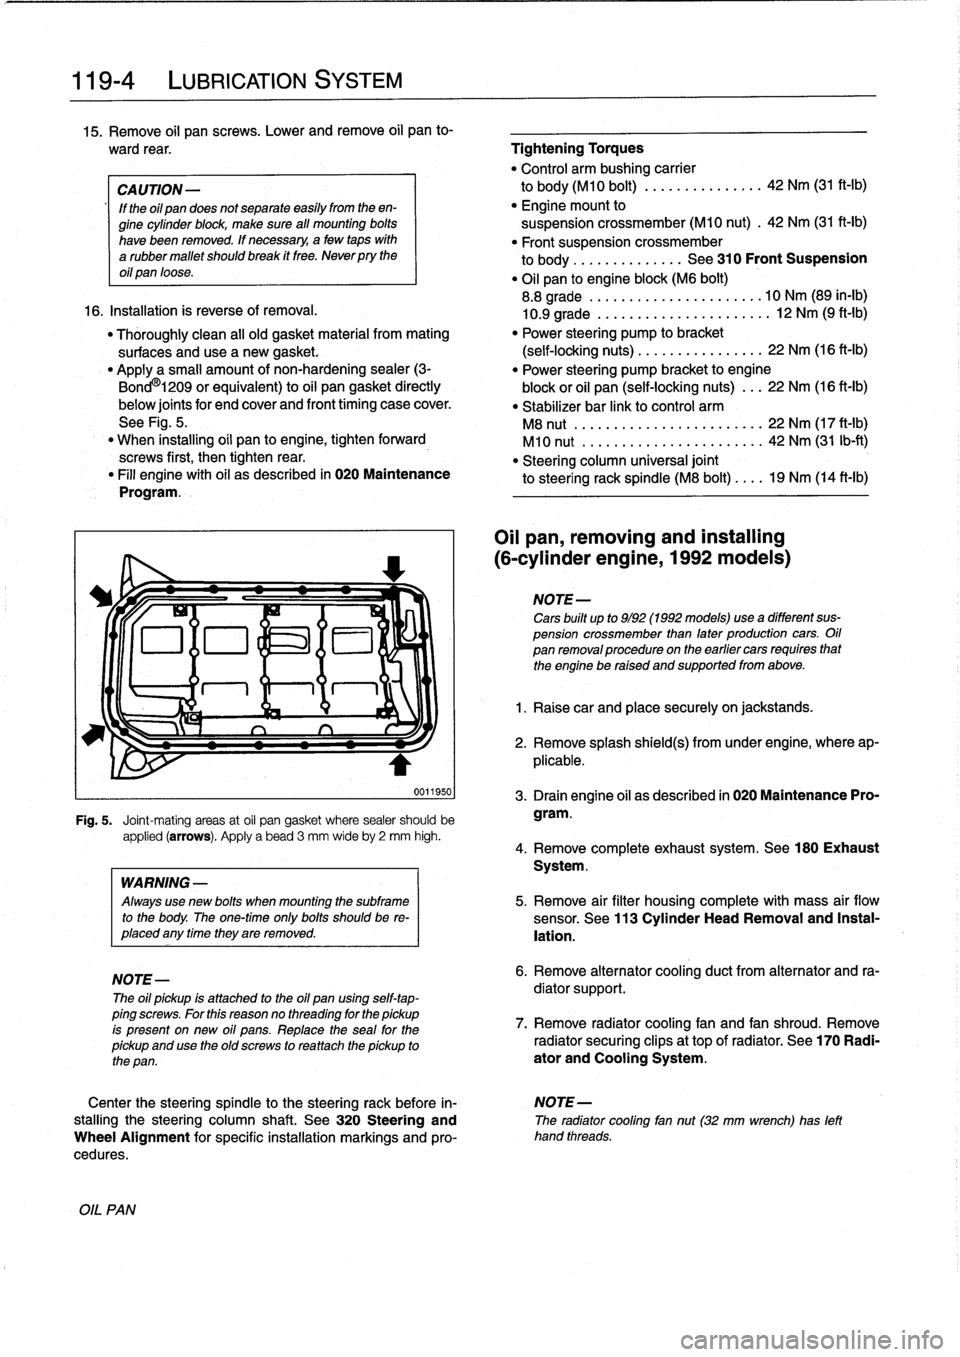 BMW 323i 1992 E36 Workshop Manual 
119-
4

	

LUBRICATION
SYSTEM

15
.
Remove
oil
pan
screws
.
Lower
andremove
oil
pan
to-

ward
rear
.

	

Tightening
Torques

"
Control
arm
bushing
carrier

CAUTION-

	

to
body(M10
bolt)
............